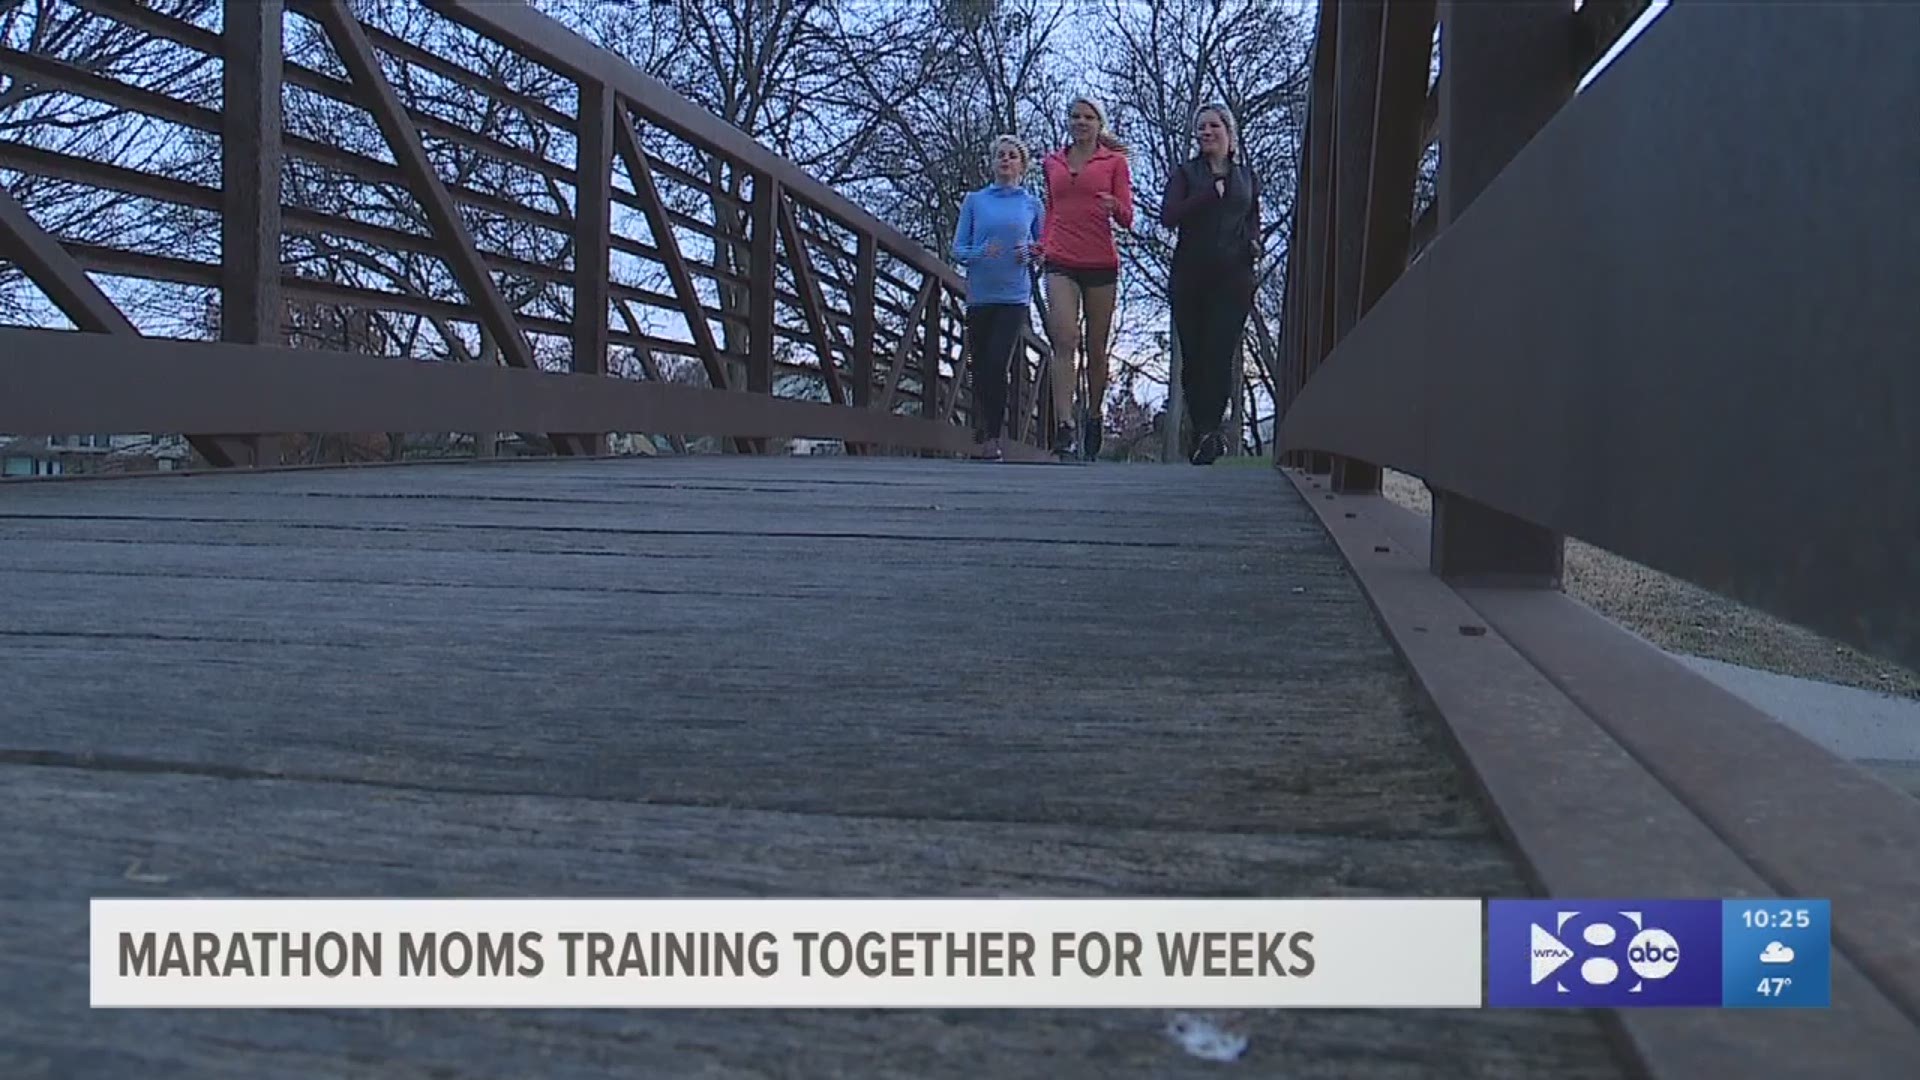 Eight moms got together and decided they wanted to train for the Dallas Marathon.  So they have - ranging from first-timers doing the half-marathon, to their group leader running the 50k!